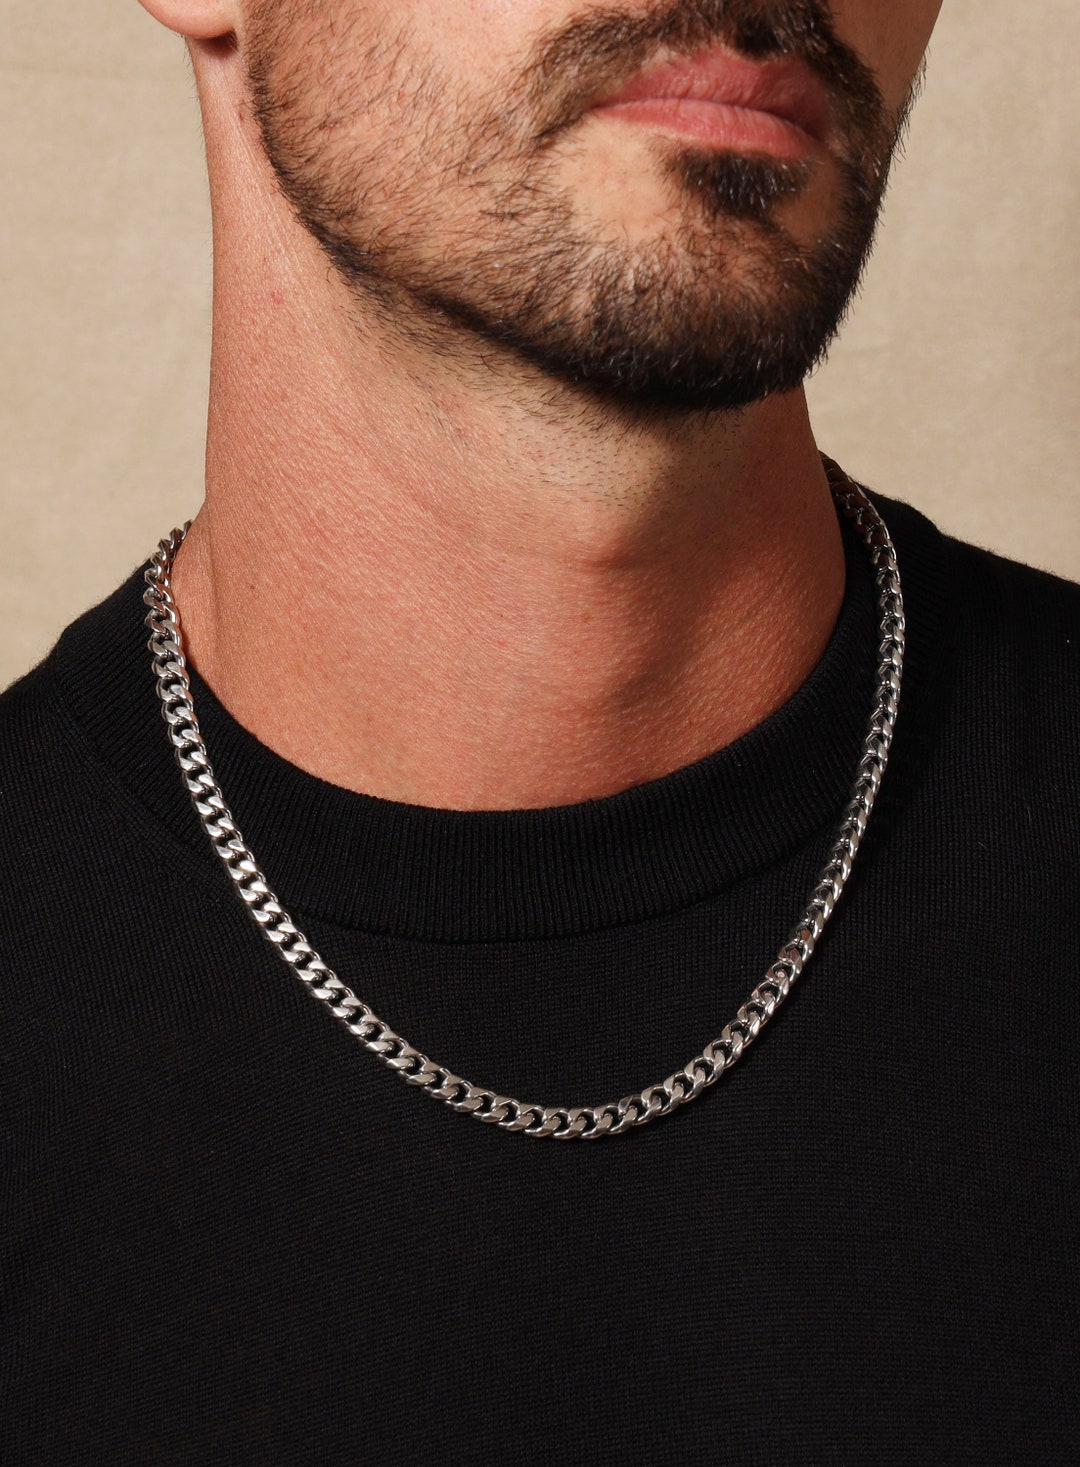 Waterproof 5mm Miami Cuban Beveled Chain Necklace for Men